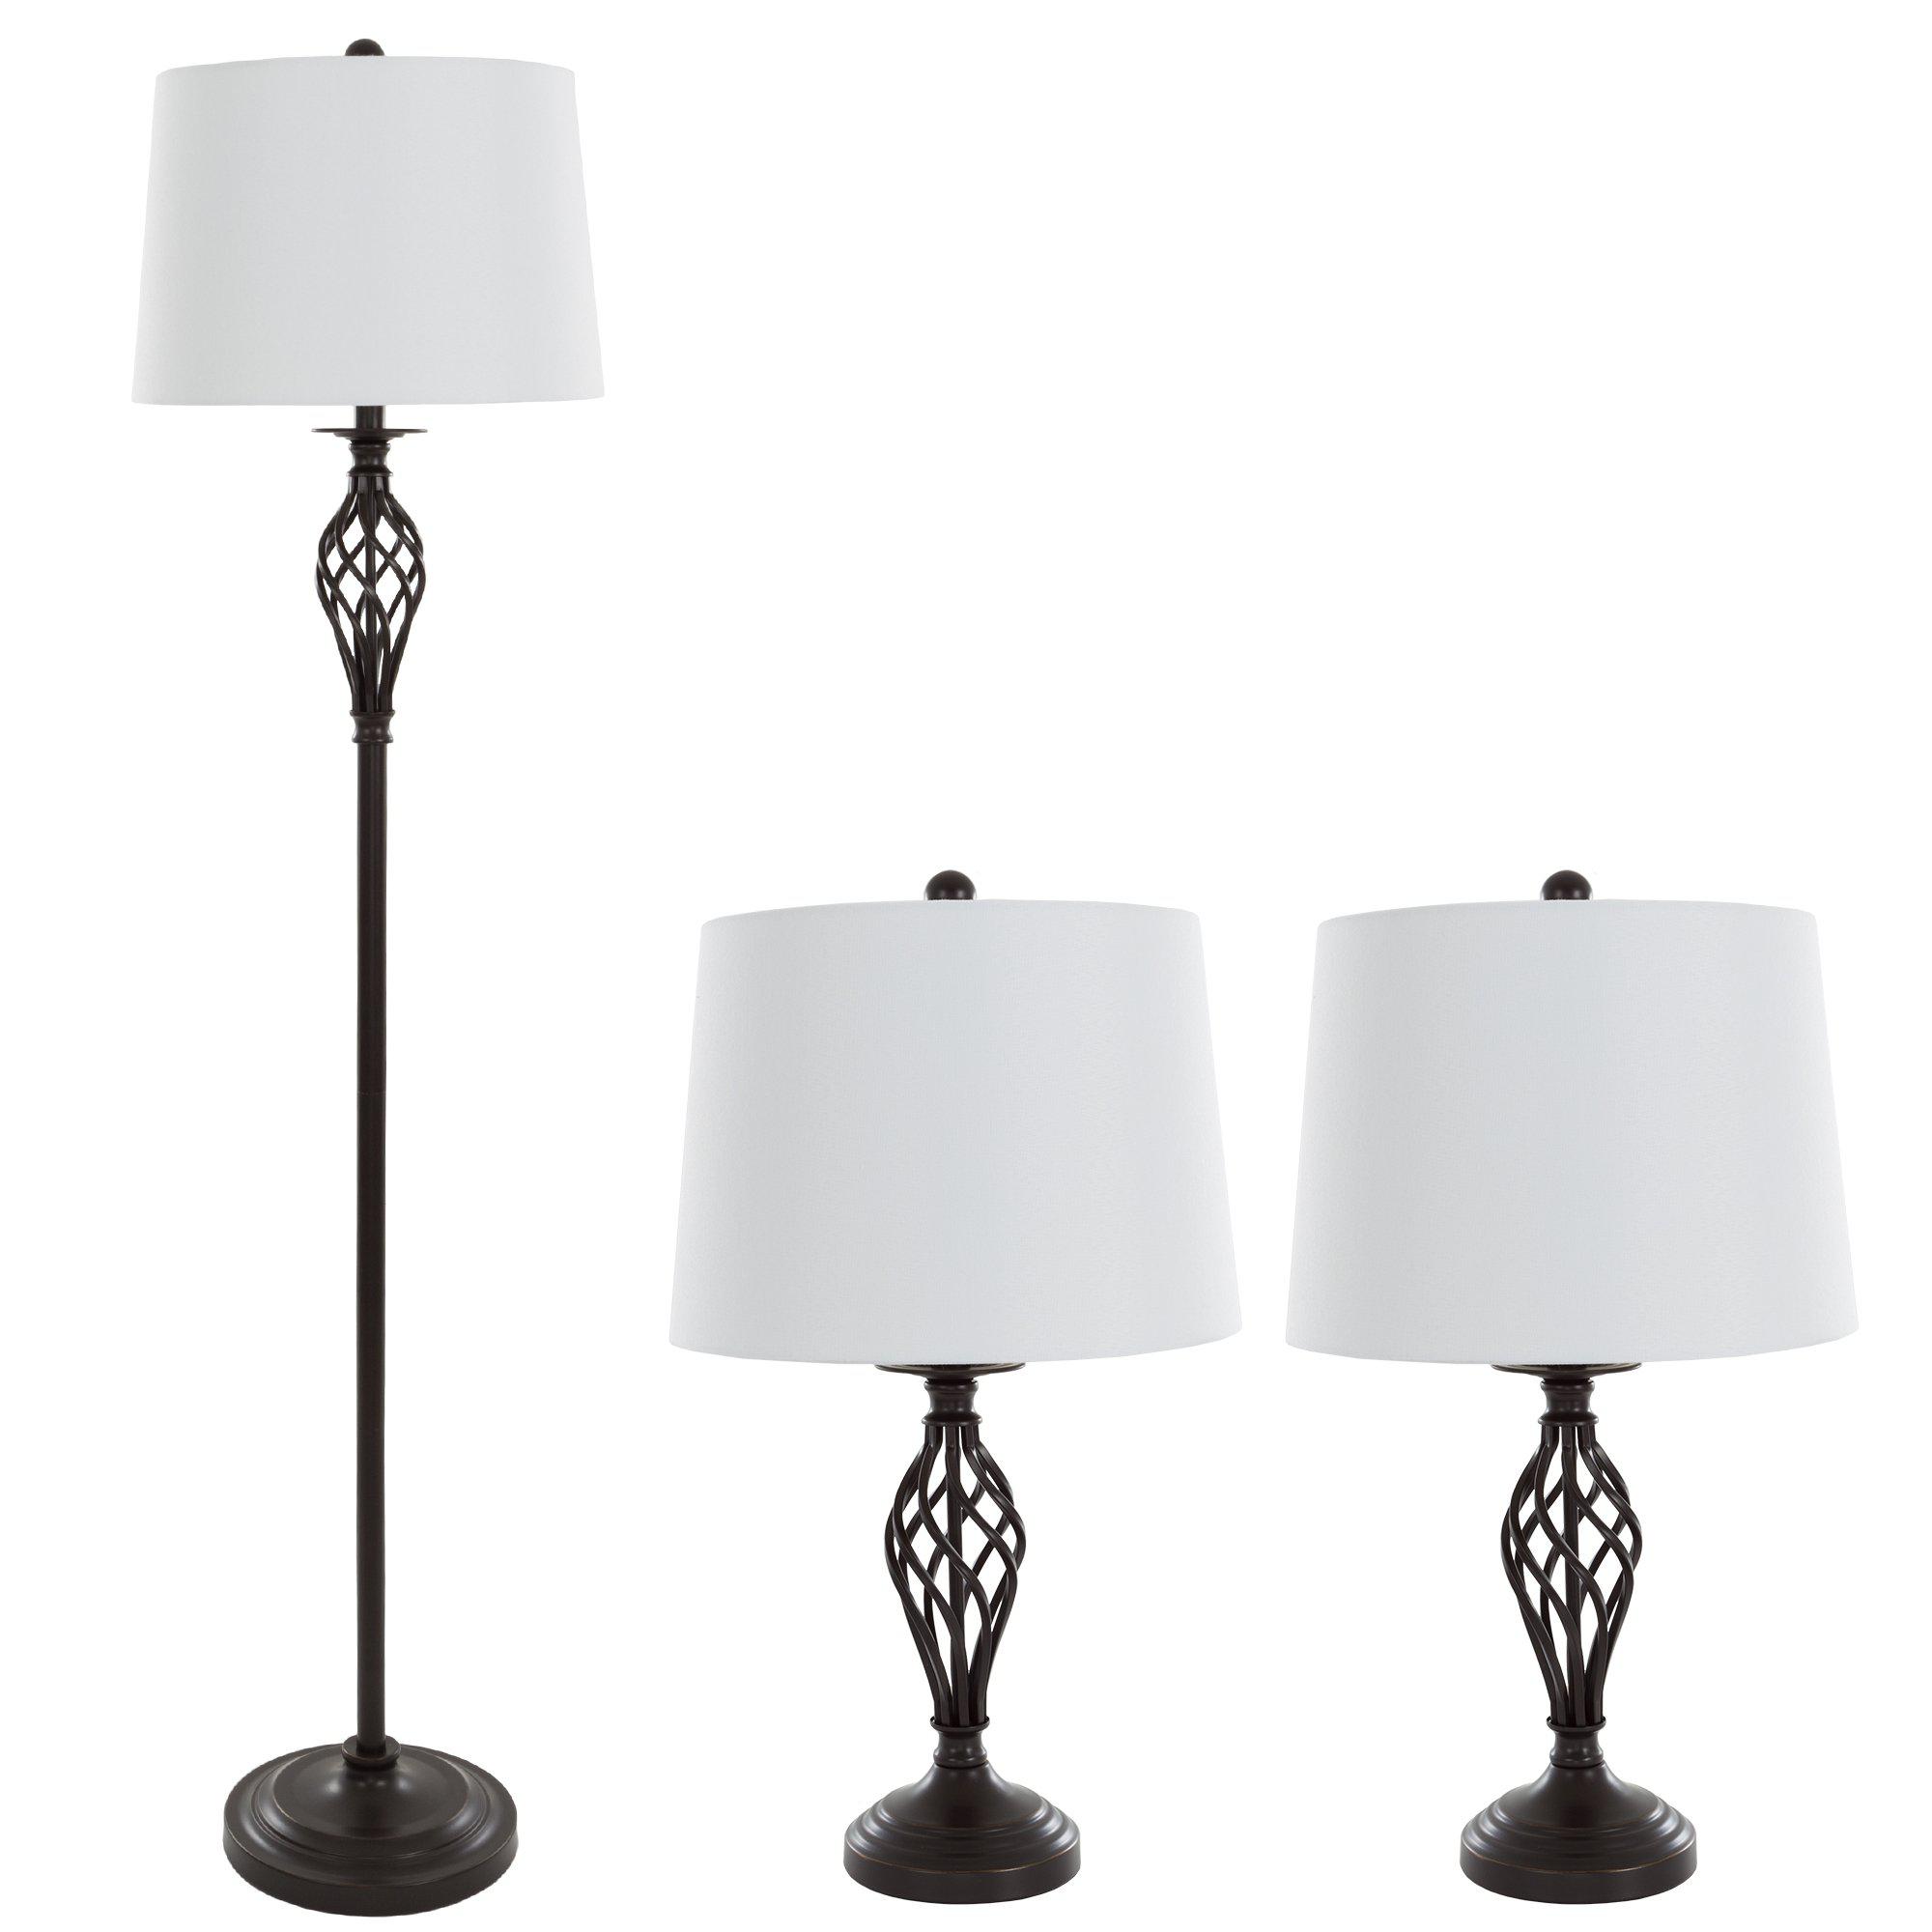 Lavish Home table lamps and floor lamp set of 3, spiral cage design (3 led bulbs included) by lavish home - 72-lmp3001